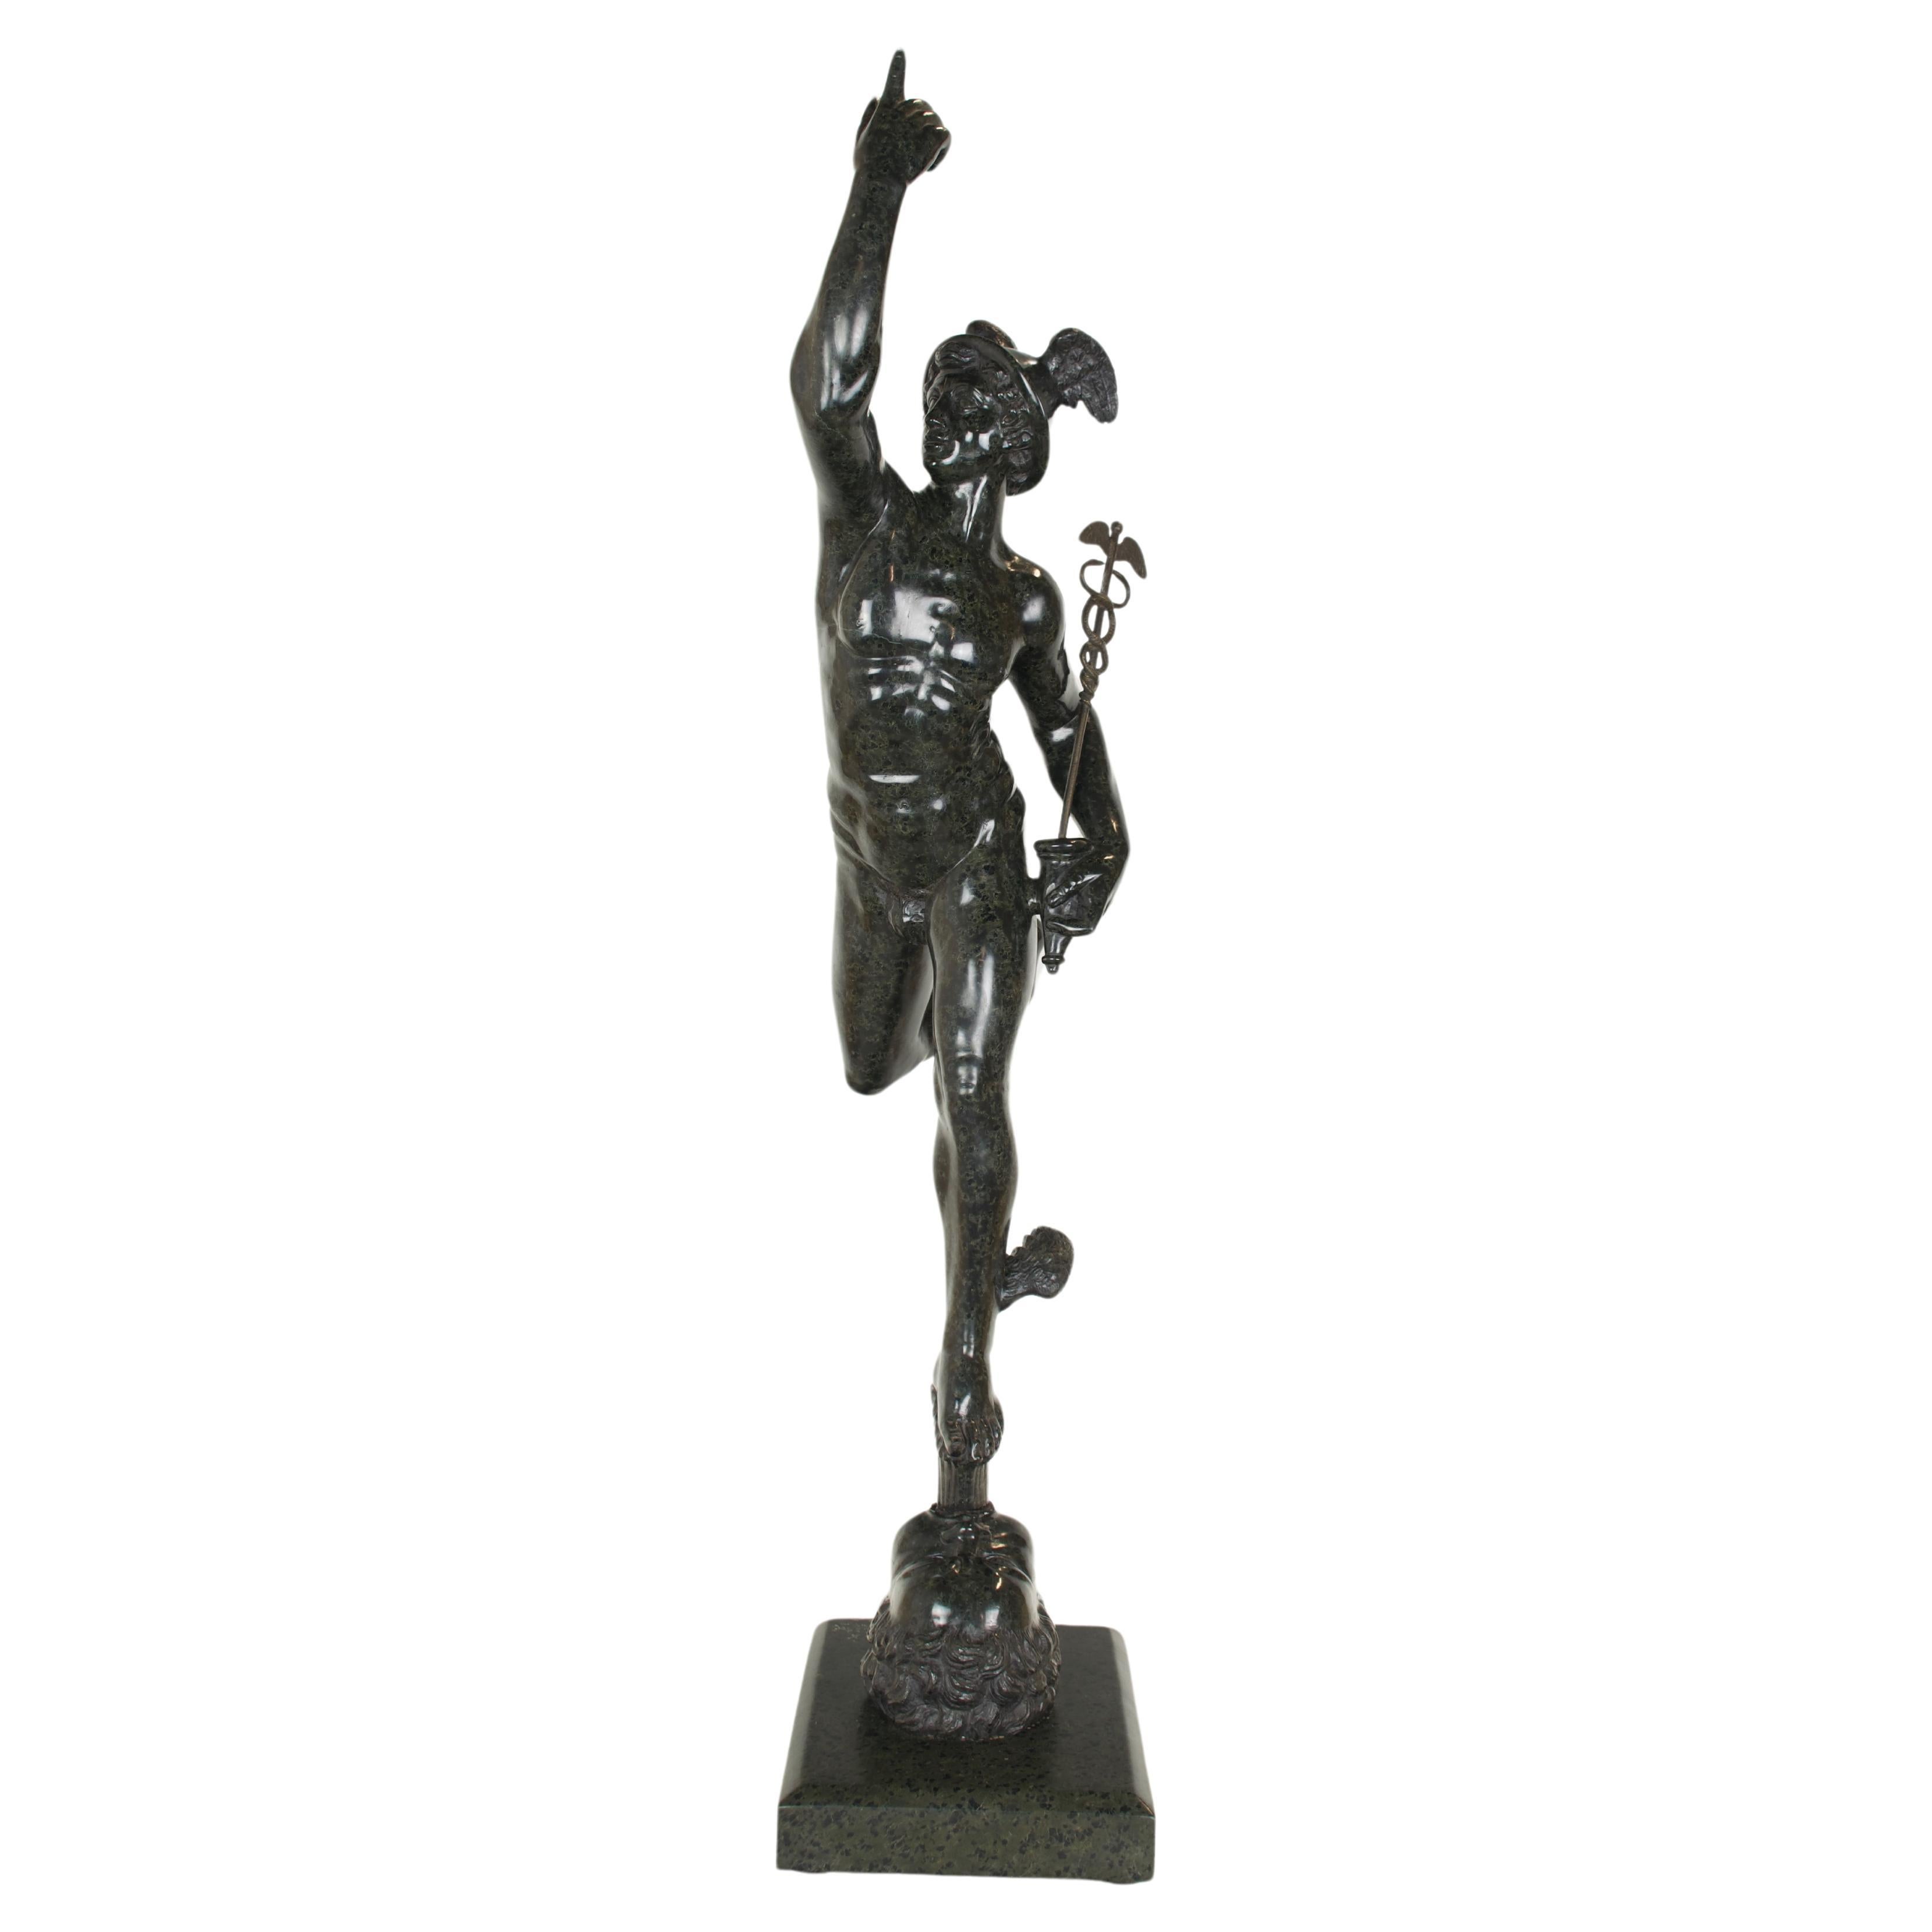 Flying Mercury in green marble copied from the famous work of Giambologna